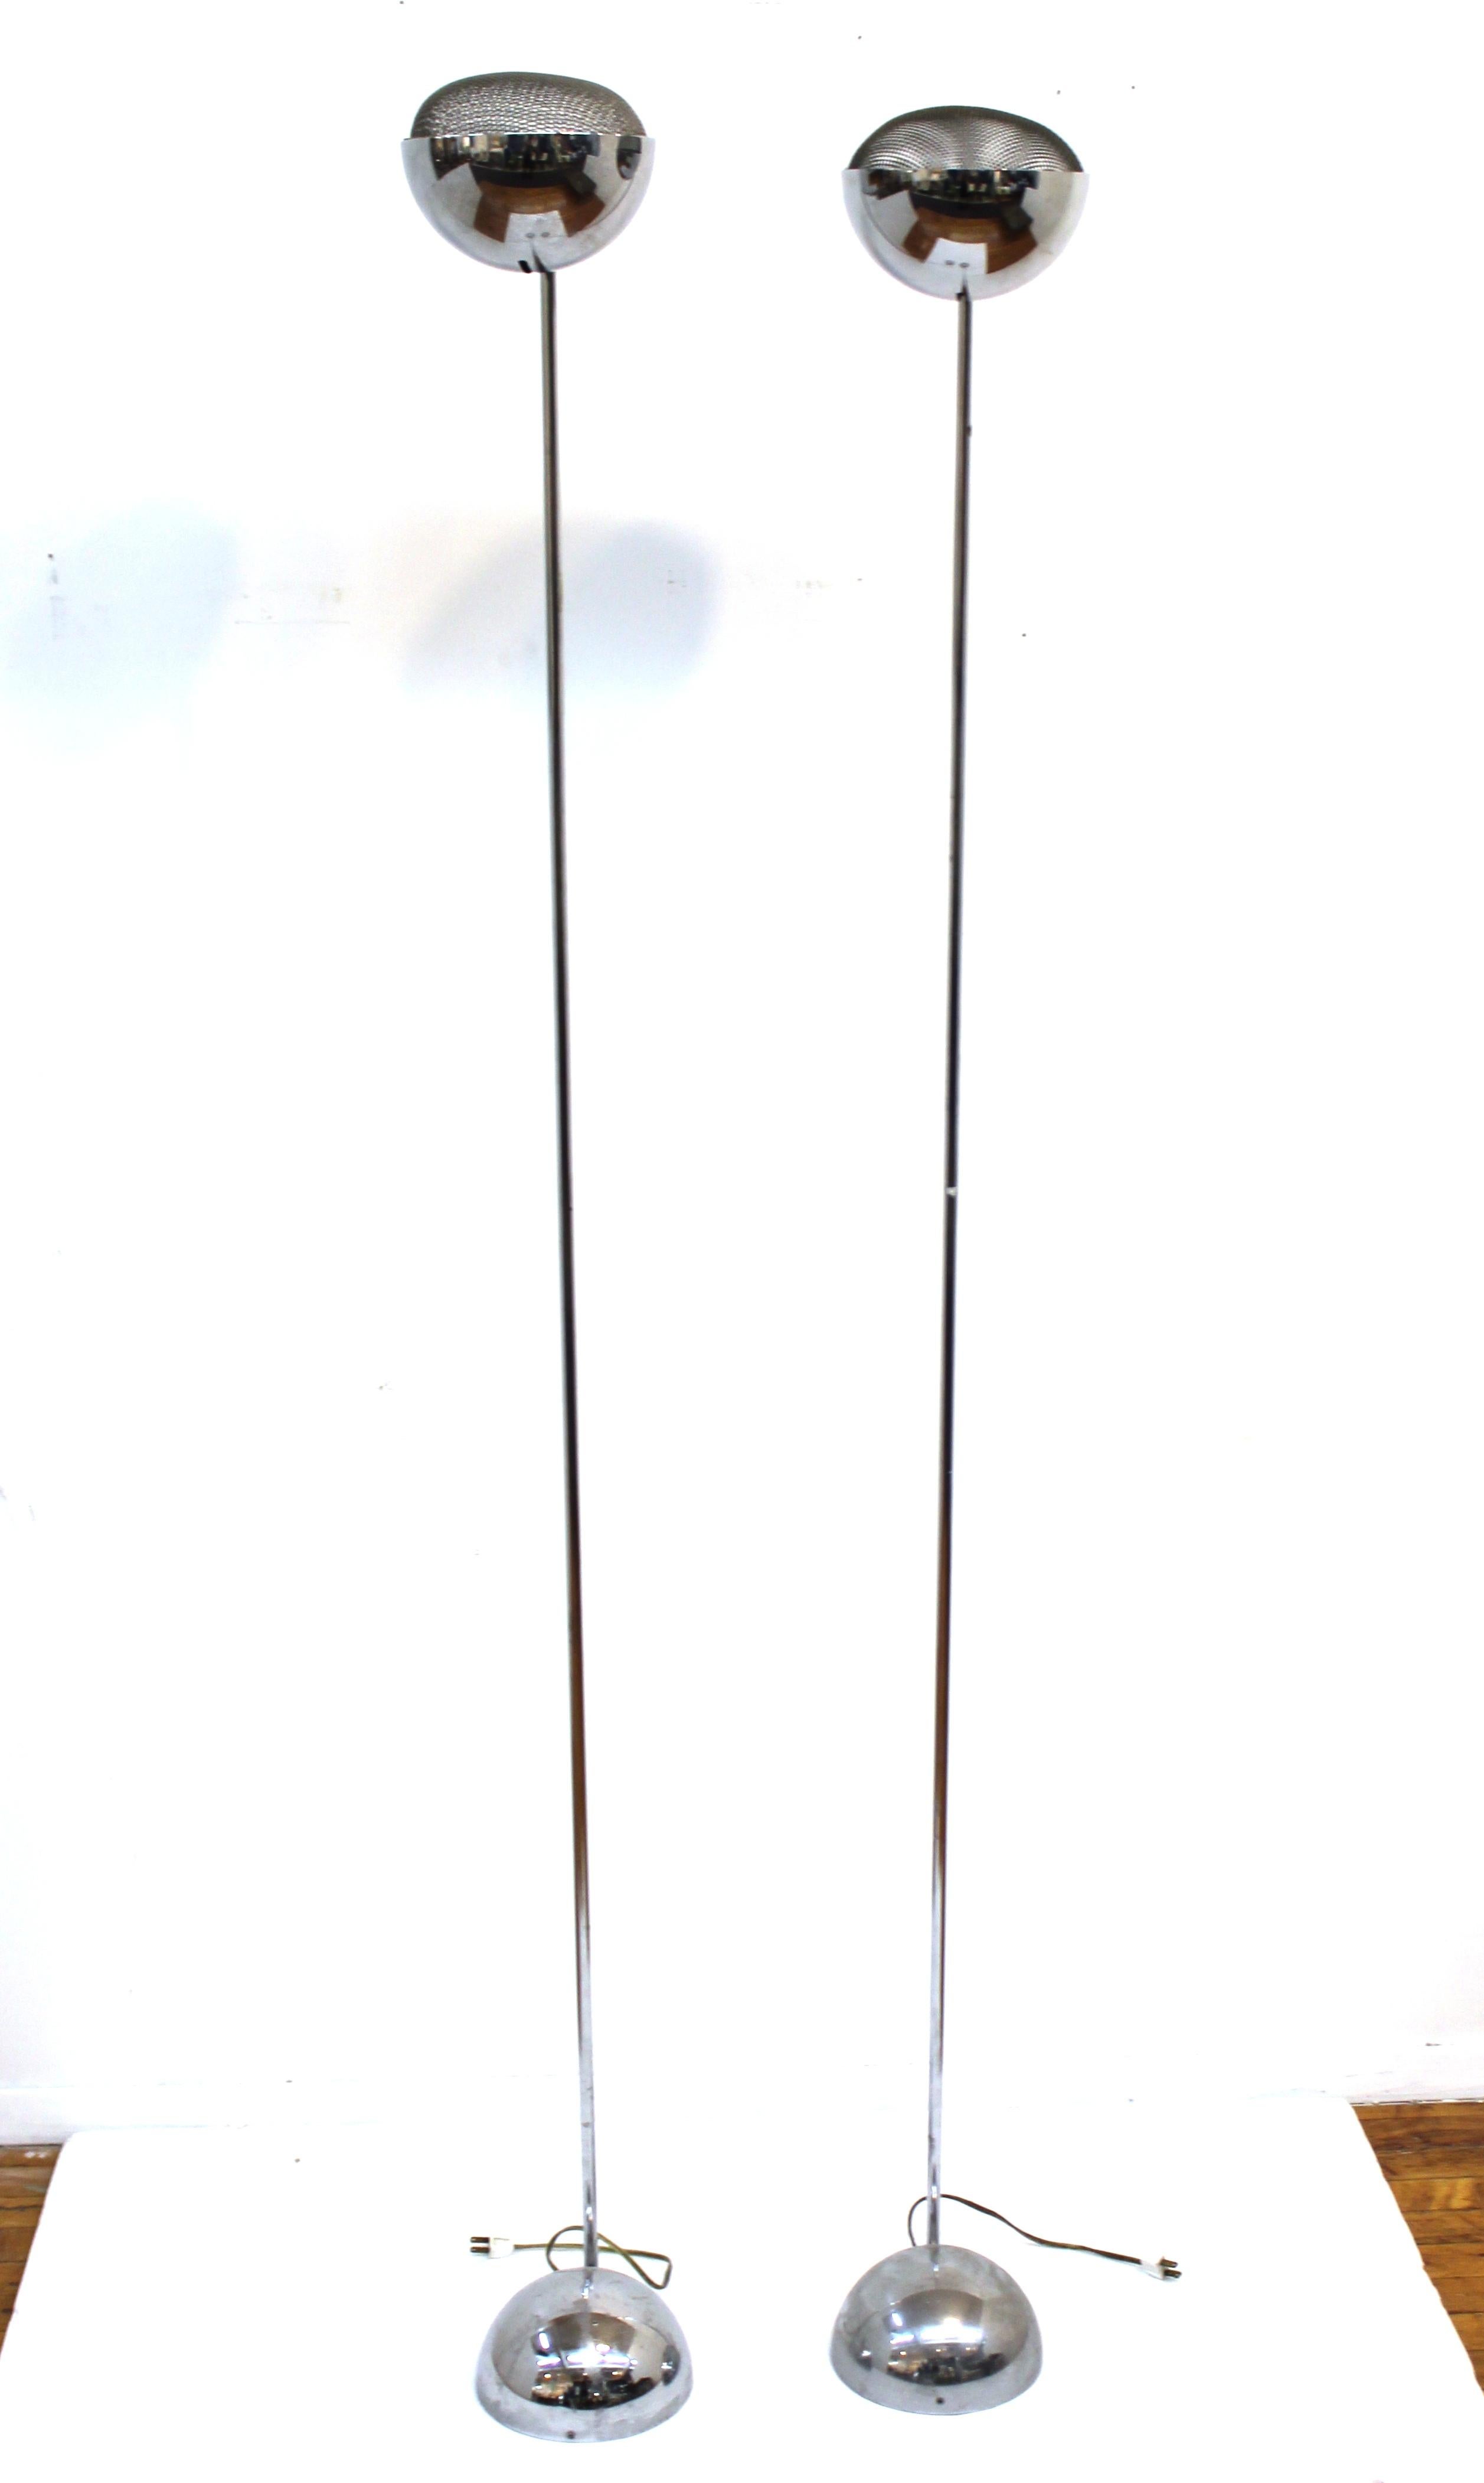 Late 20th Century Italian Modern Chromed Metal Torchiere Floor Lamps